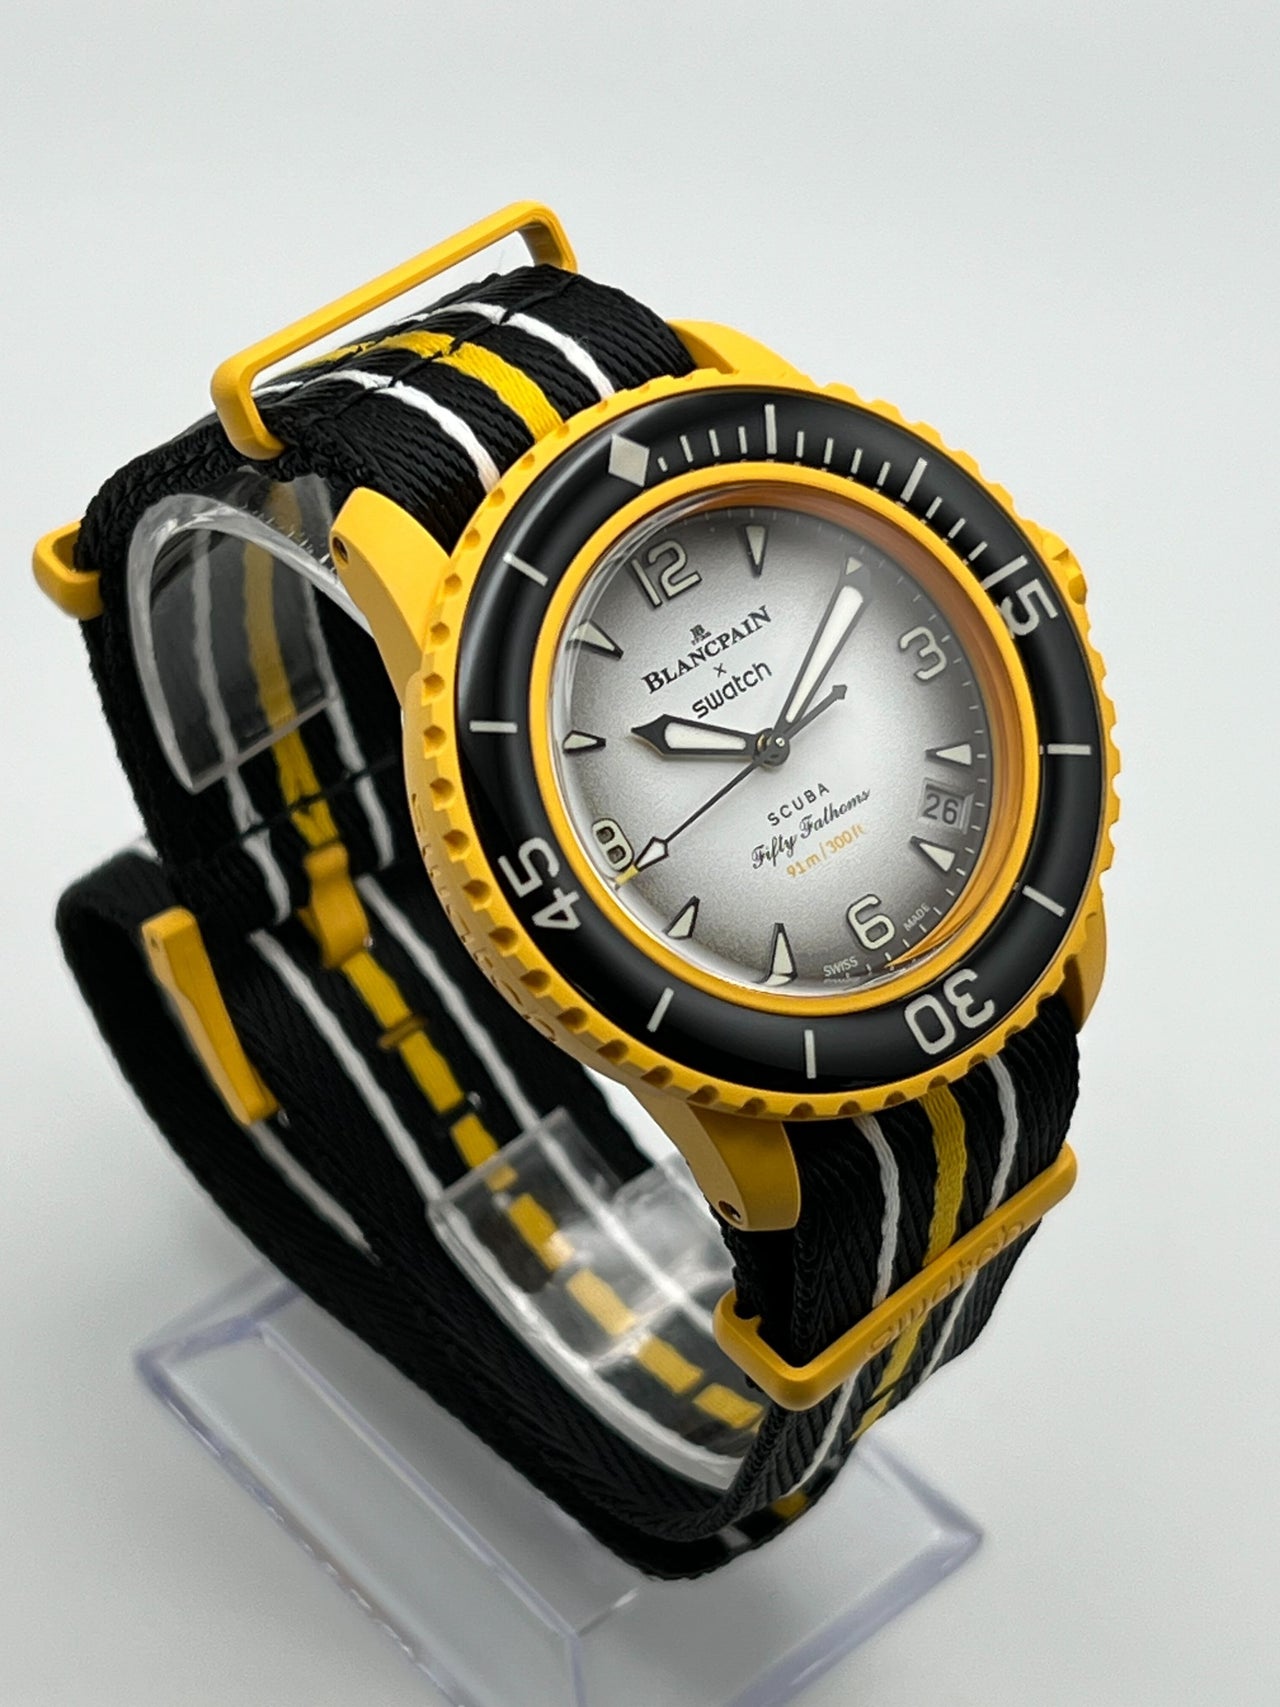 Blancpain x Swatch Scuba Fifty Fathoms Collection Pacific Ocean 